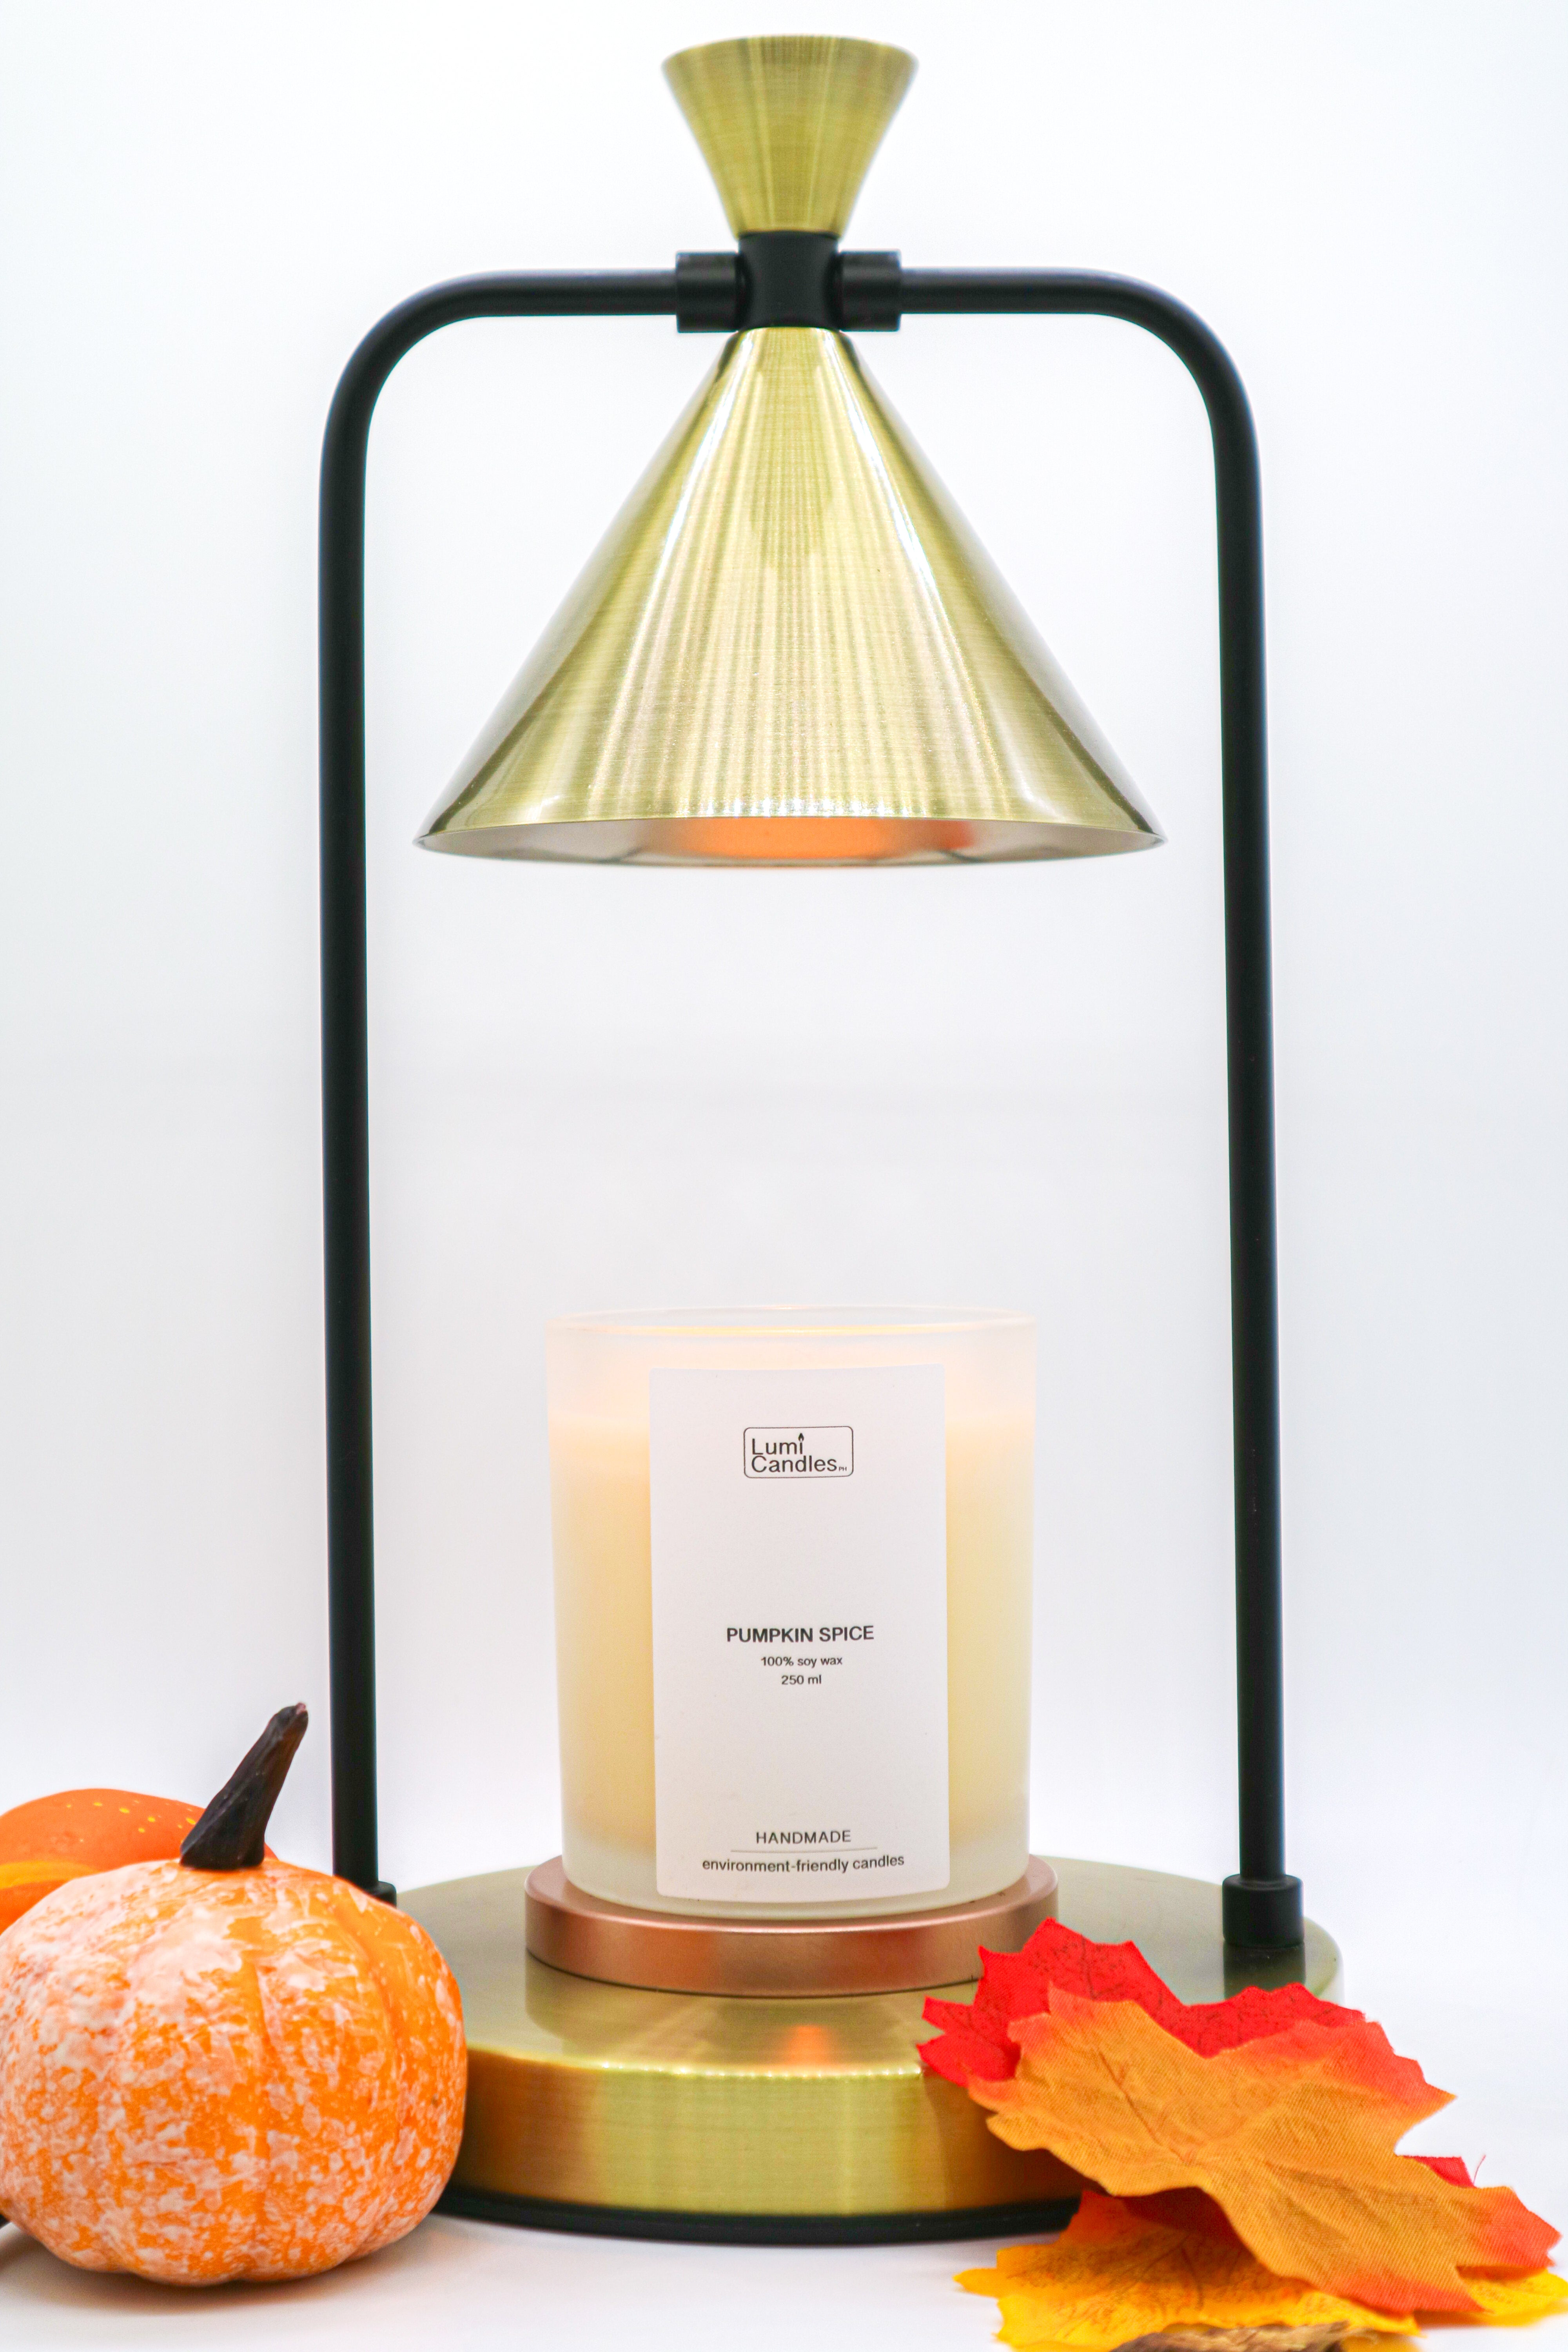 A Pumpkin Spice Lumi Candle with a Candle Warmer